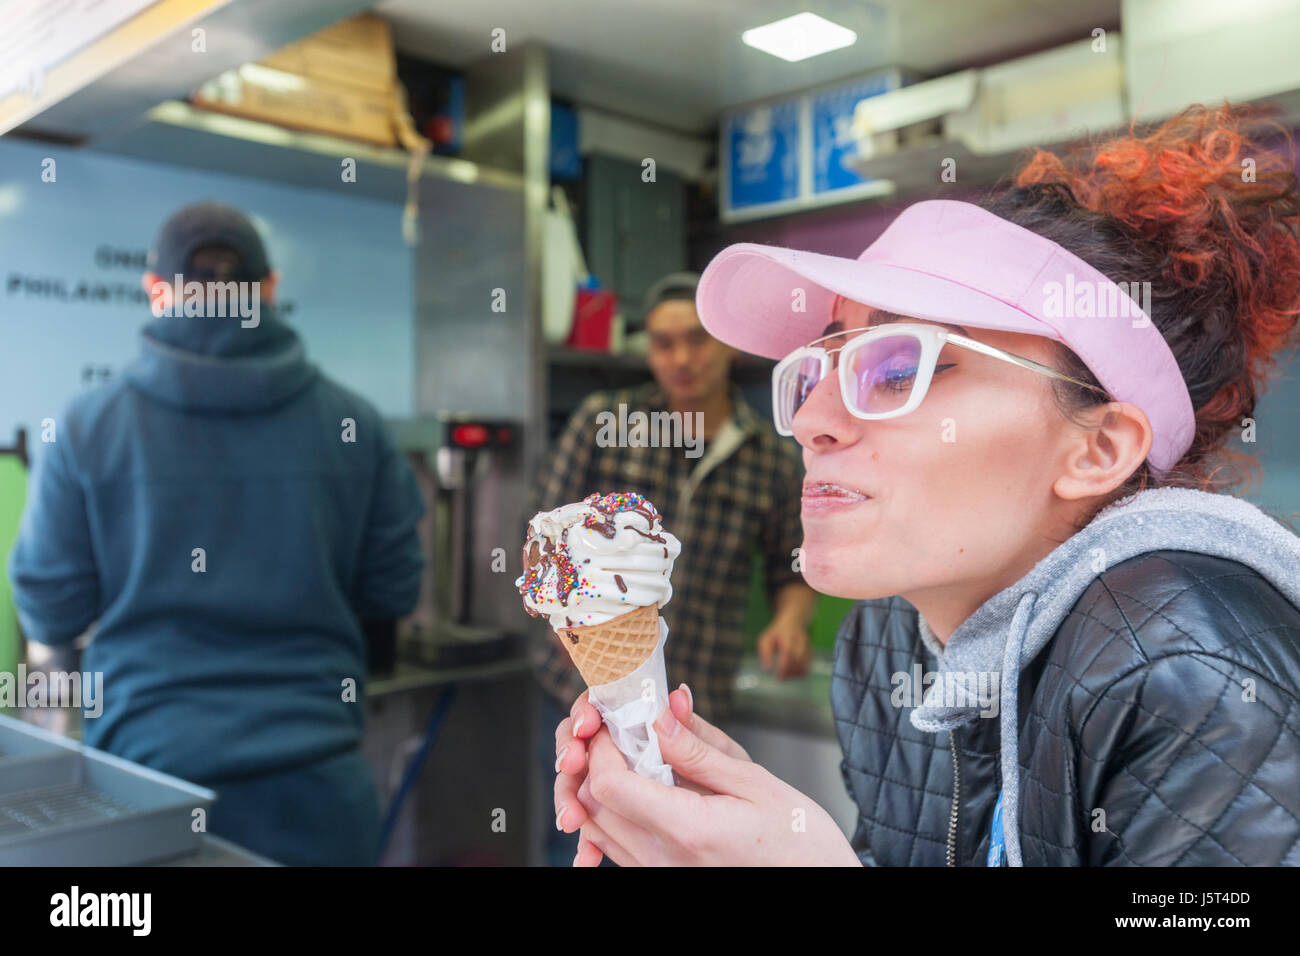 A worker samples an ice cream cone at the 'I Scream', Ice & Vice pop-up kiosk in Times Square in New York on Tuesday, May 16, 2017. 'I Scream's' menu features politically themed flavors such as Freeze Global Warming and No Mean No with five percent of each purchase going to organizations ACLU, Planned parenthood and the NRDC. The pop-up will be in Times Square through the summer. (© Richard B. Levine) Stock Photo